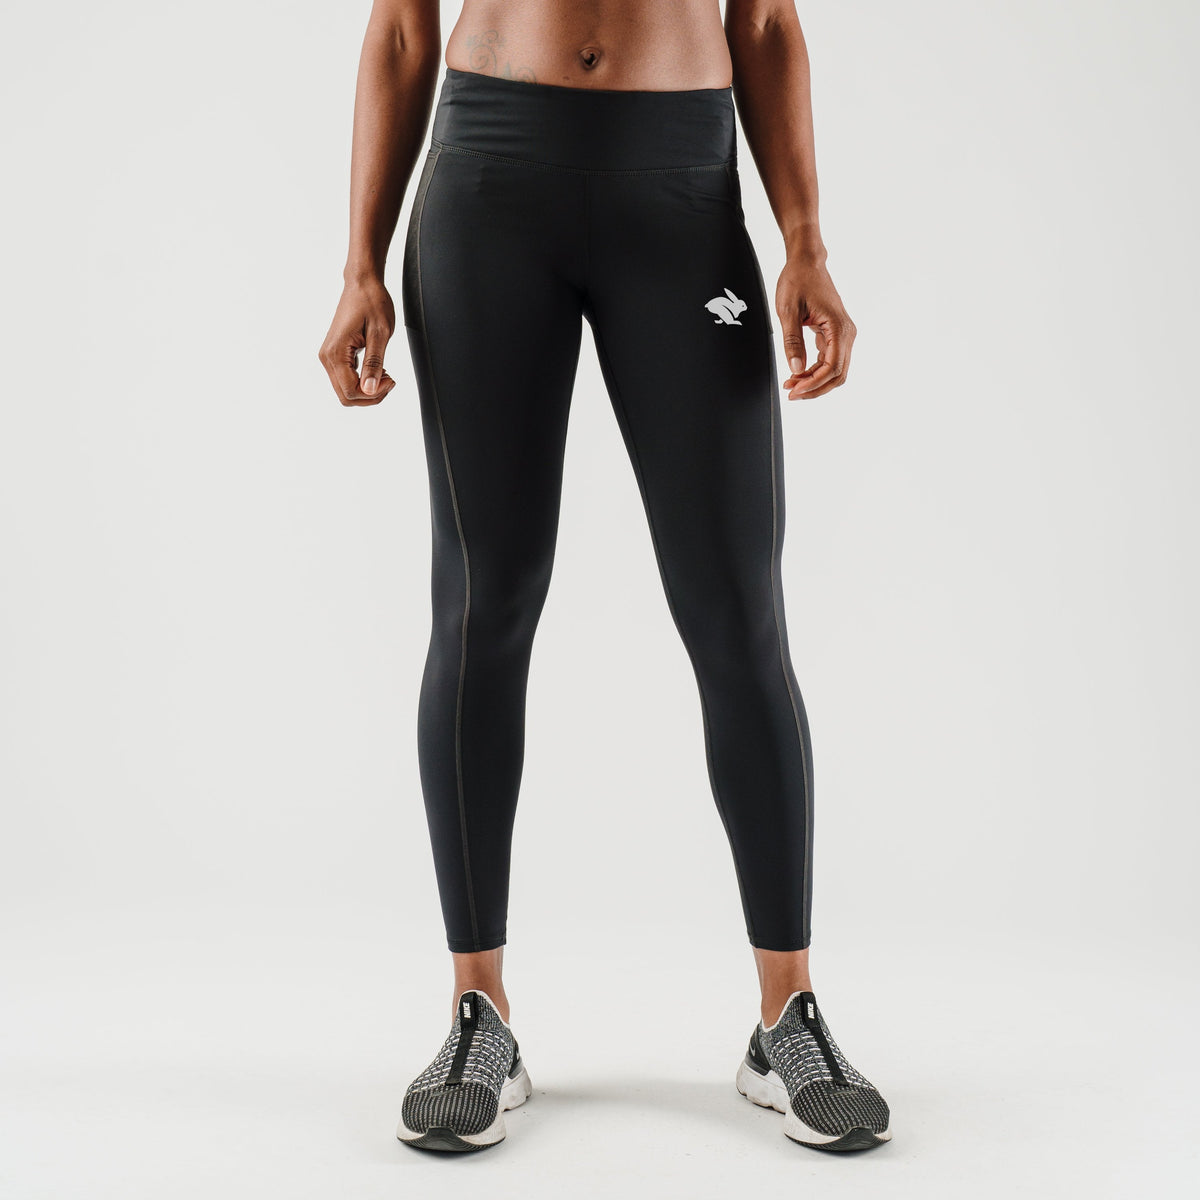  Brooks Momentum Thermal Tights Black XS (US 0-2) : Clothing,  Shoes & Jewelry